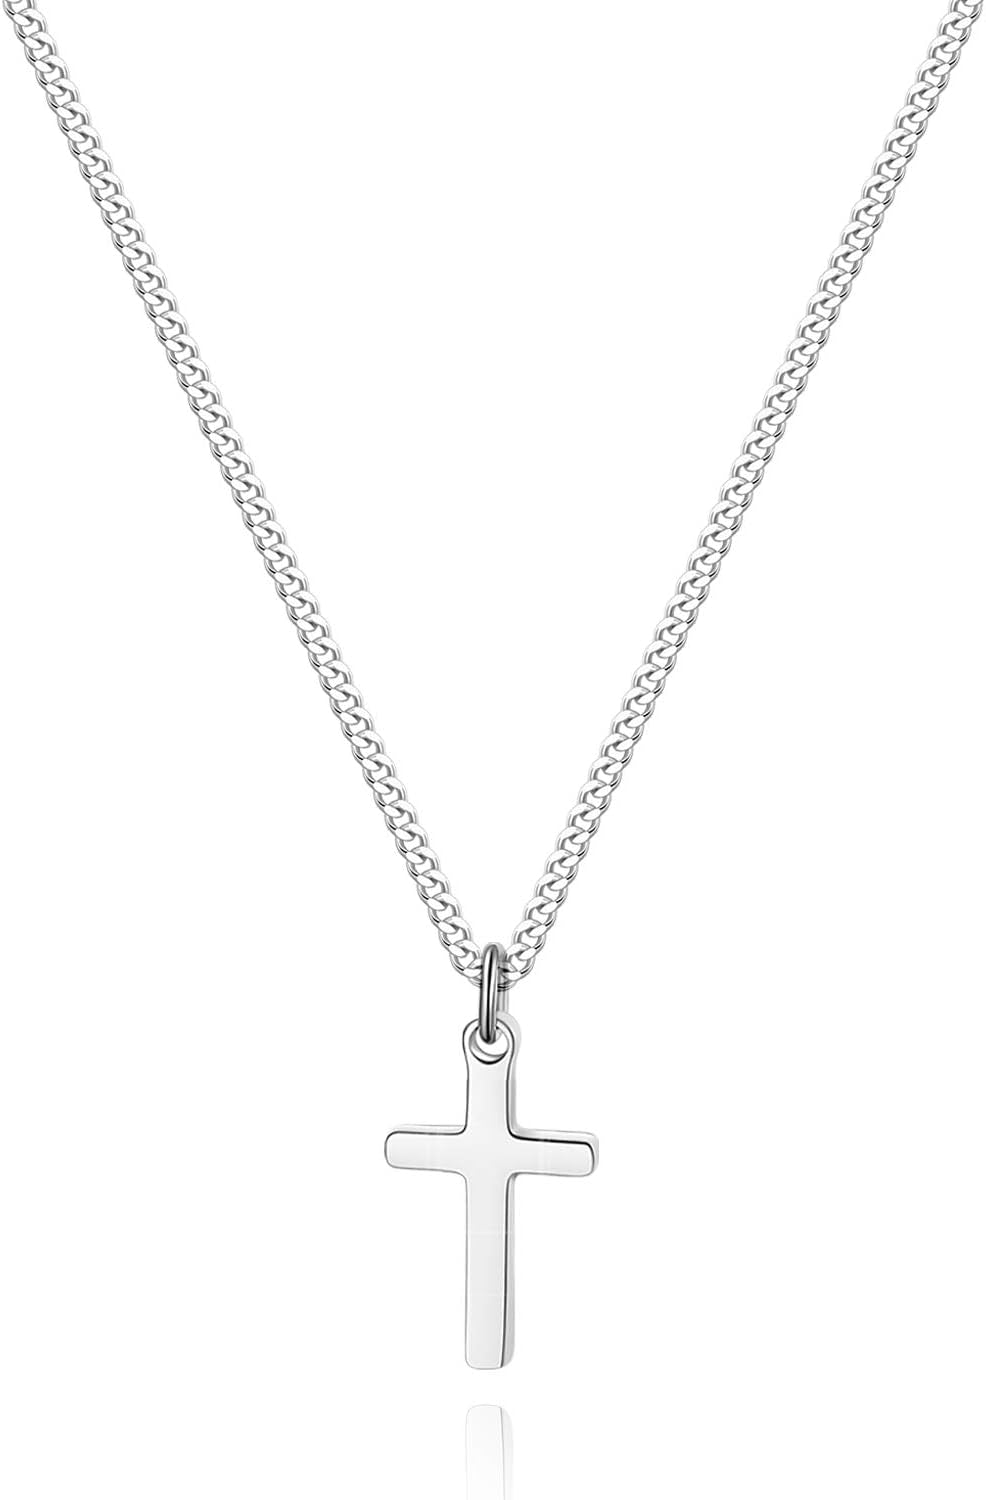 Cross Necklace for Boy Silver Stainless Steel Small Cross Pendant with Cuban Chain Necklace Simple Faith Jewelry for Kids Men Women Girls 16-24 Inches